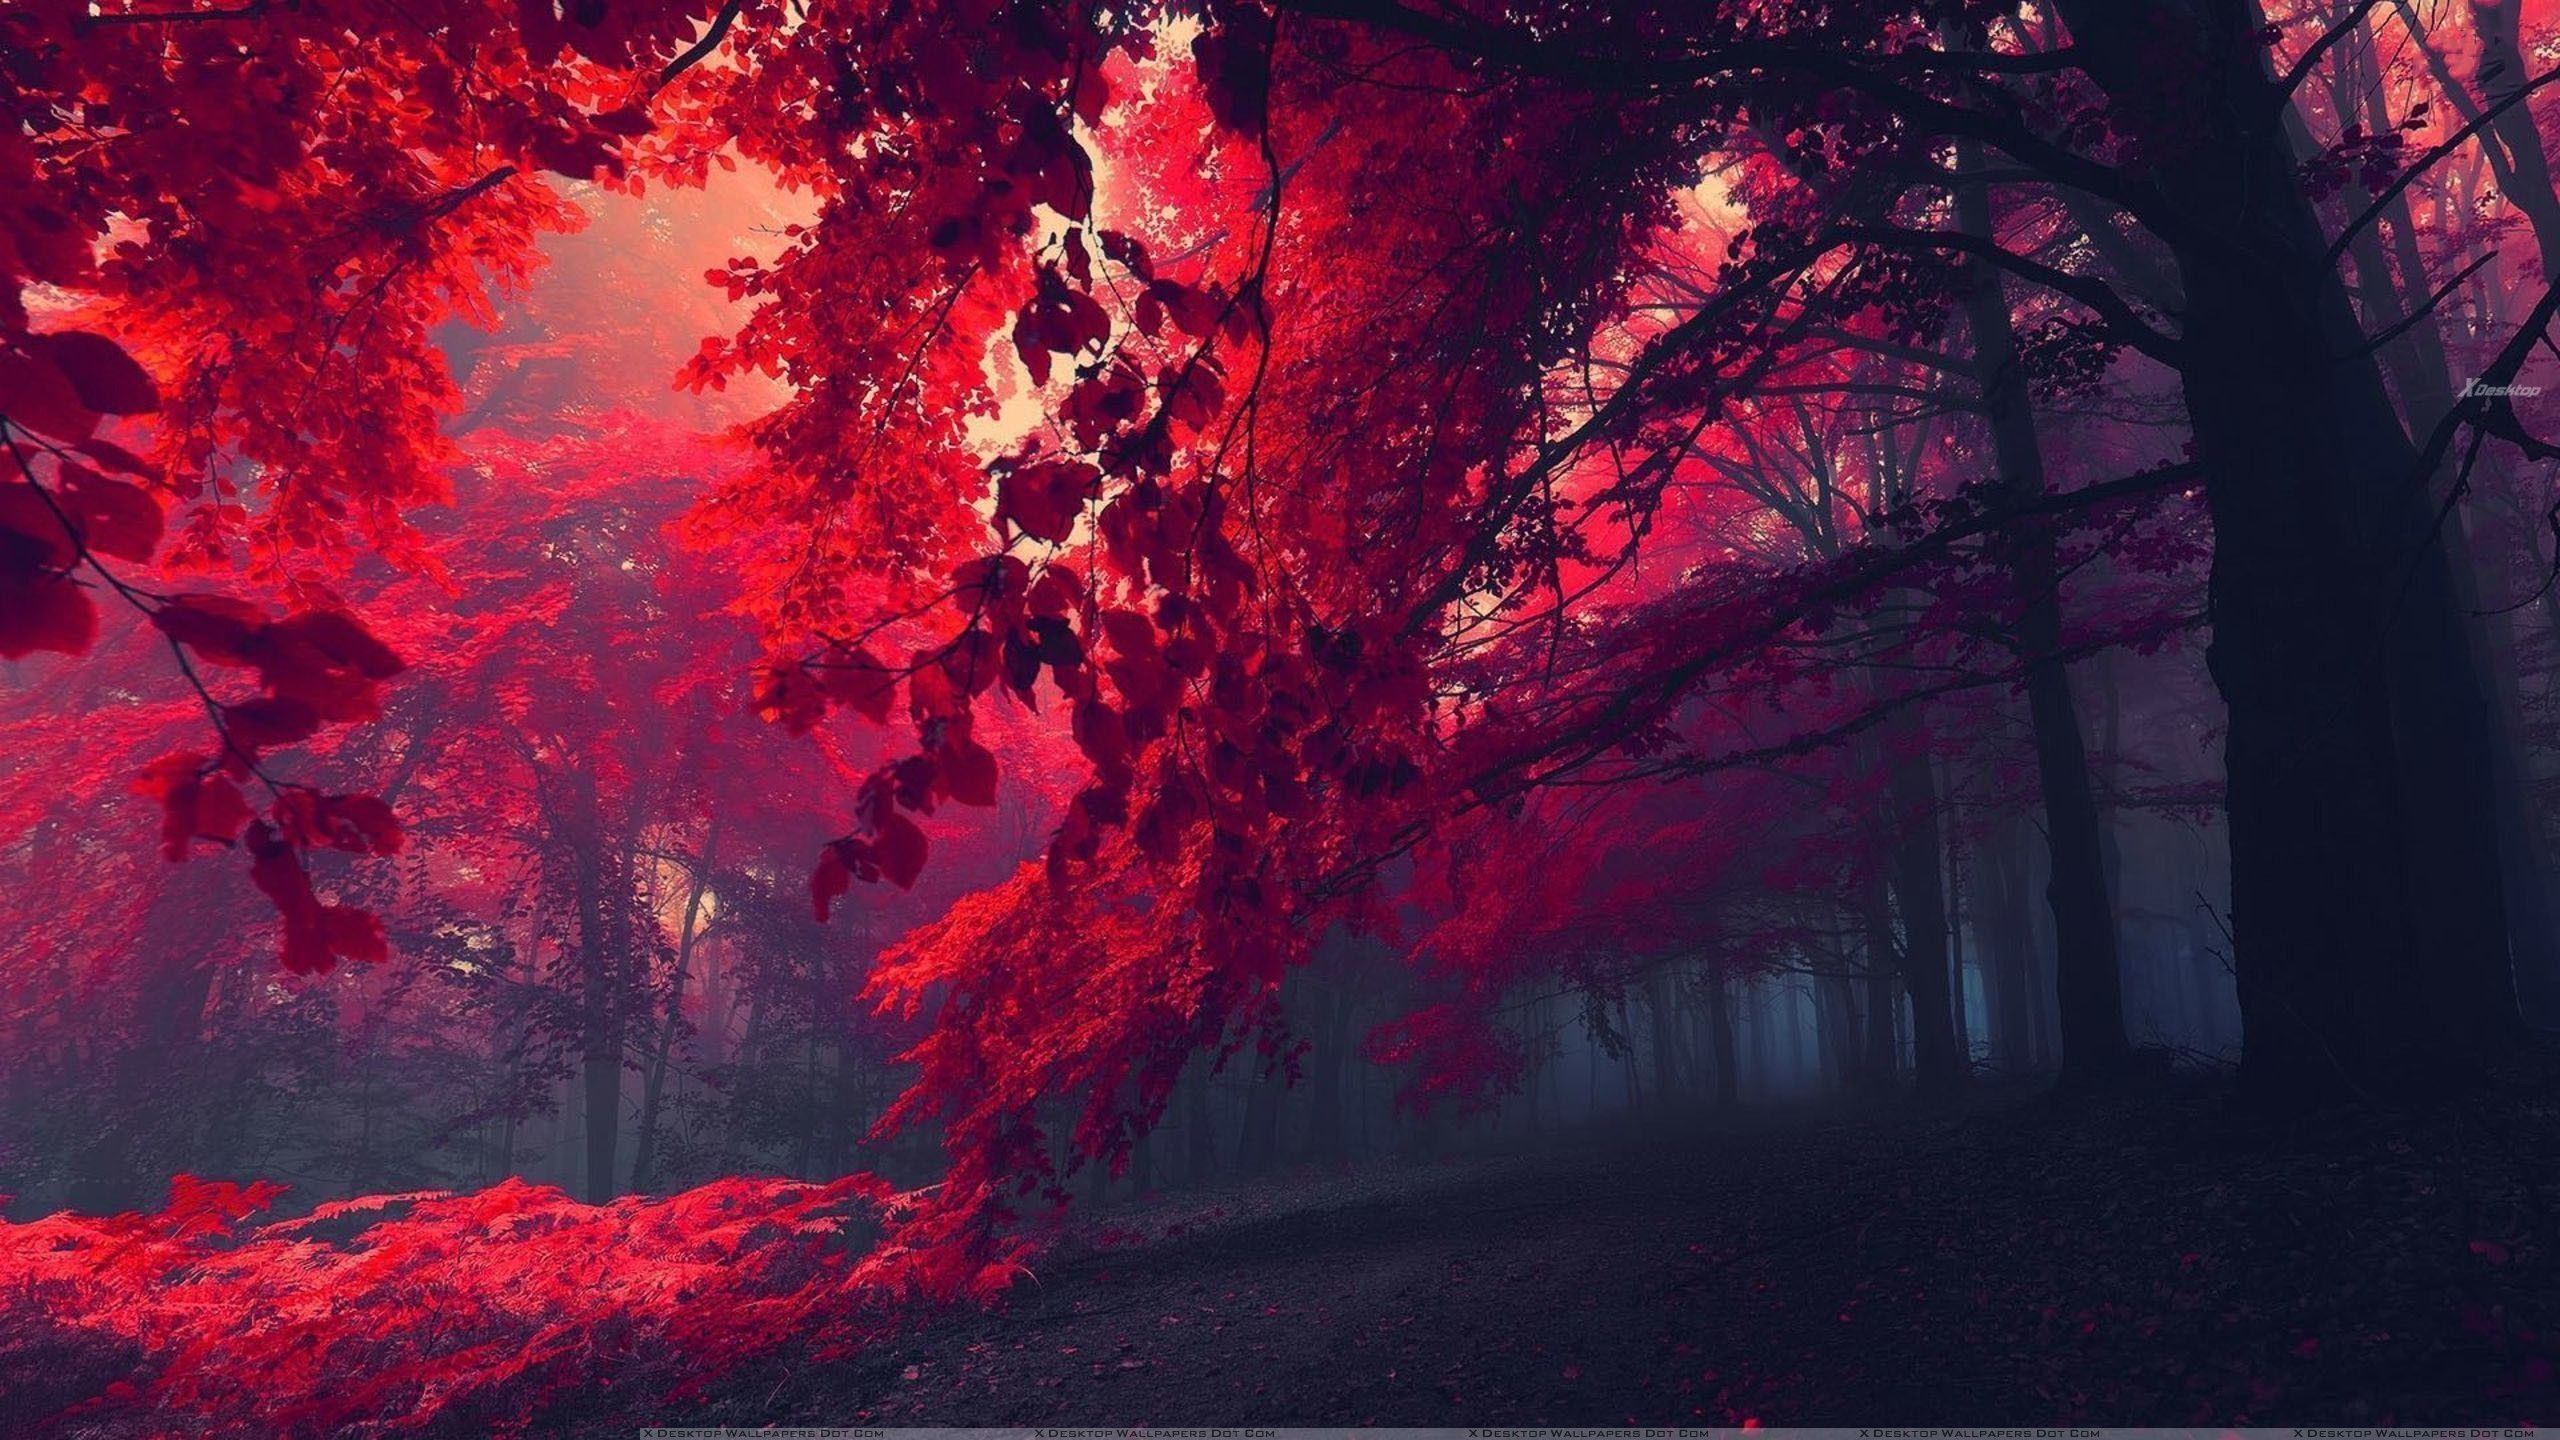 Beautiful Red Wallpapers